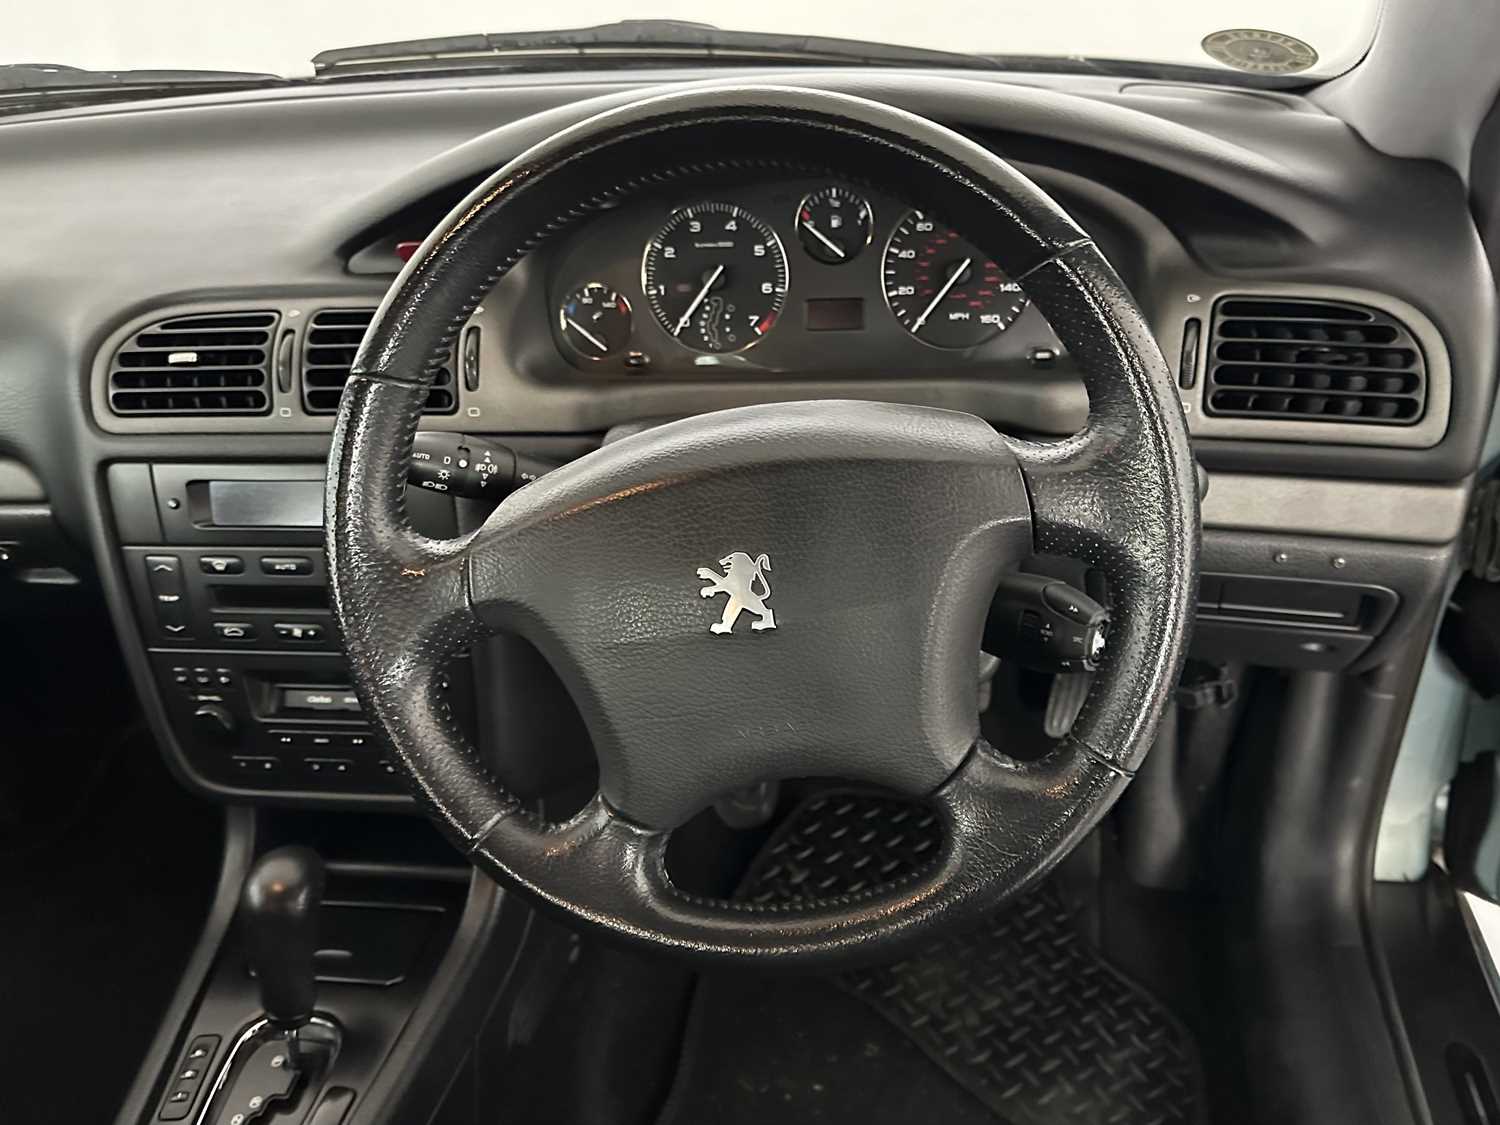 2002 Peugeot 406 Coupe - Image 24 of 28